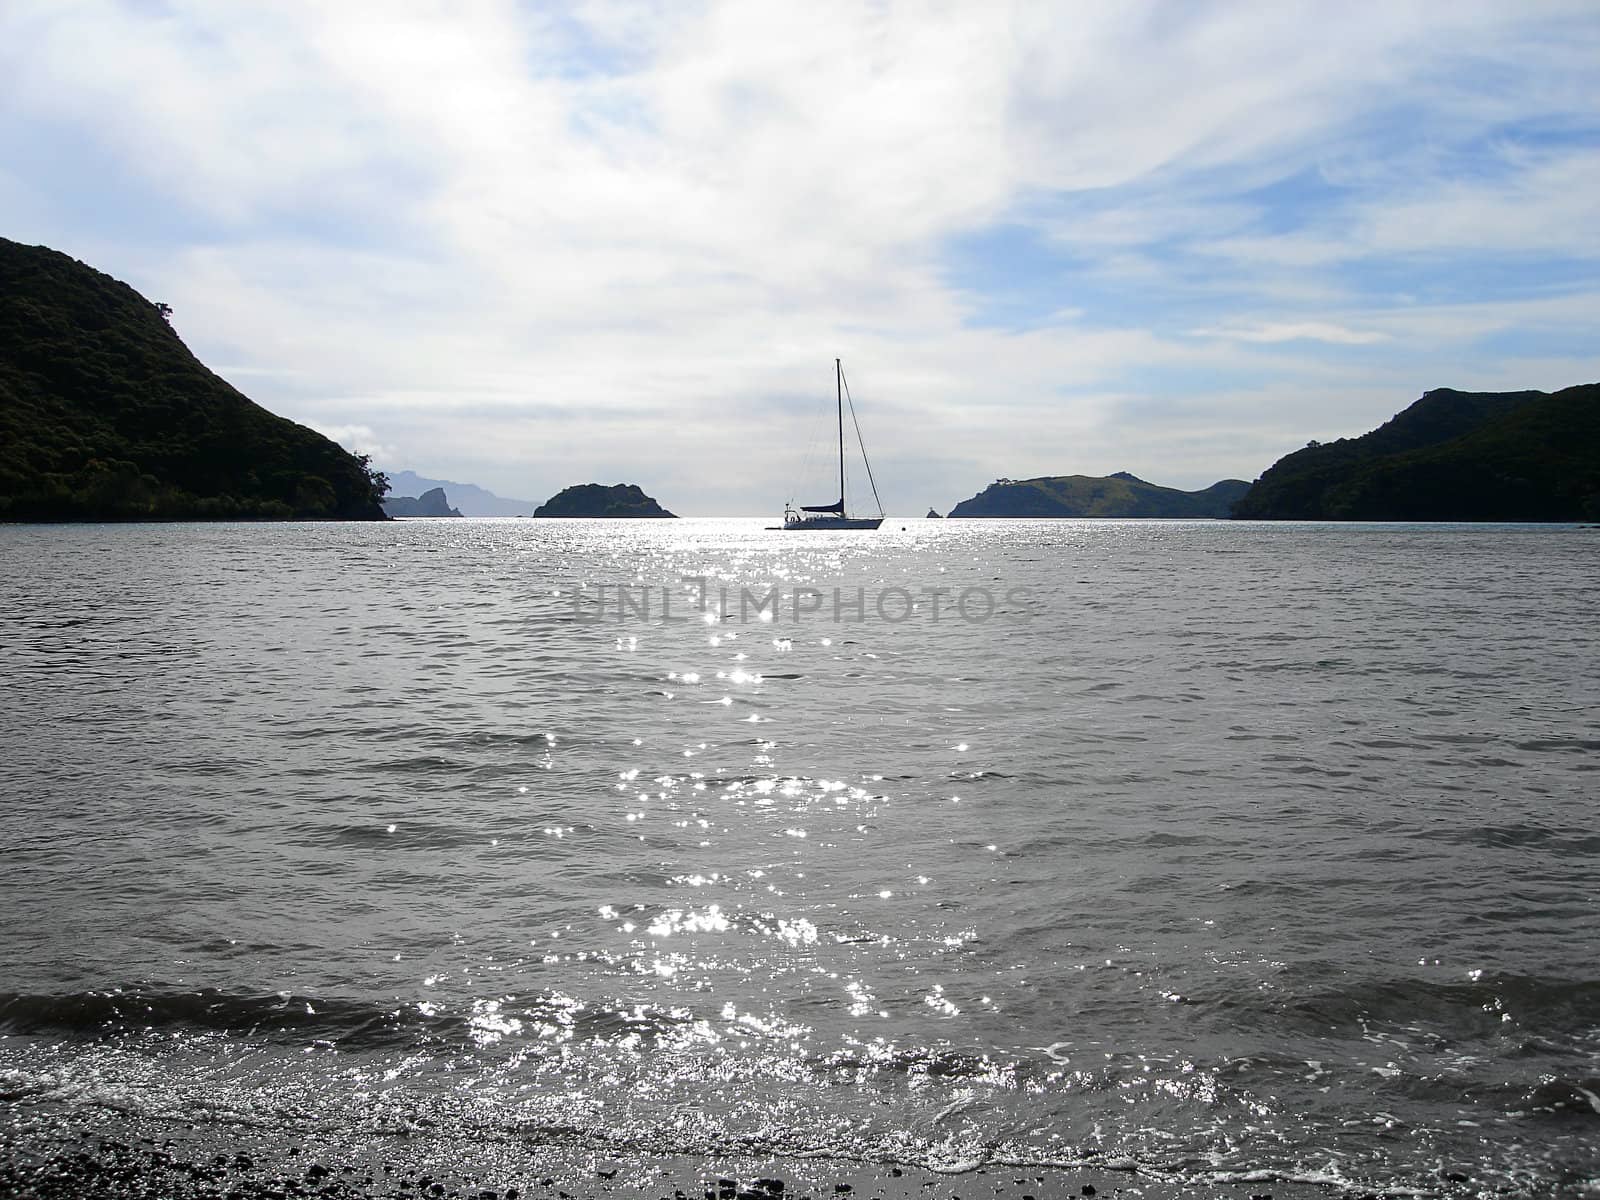 Sailing Yacht at Rest, Great Barrier Island, New Zealand